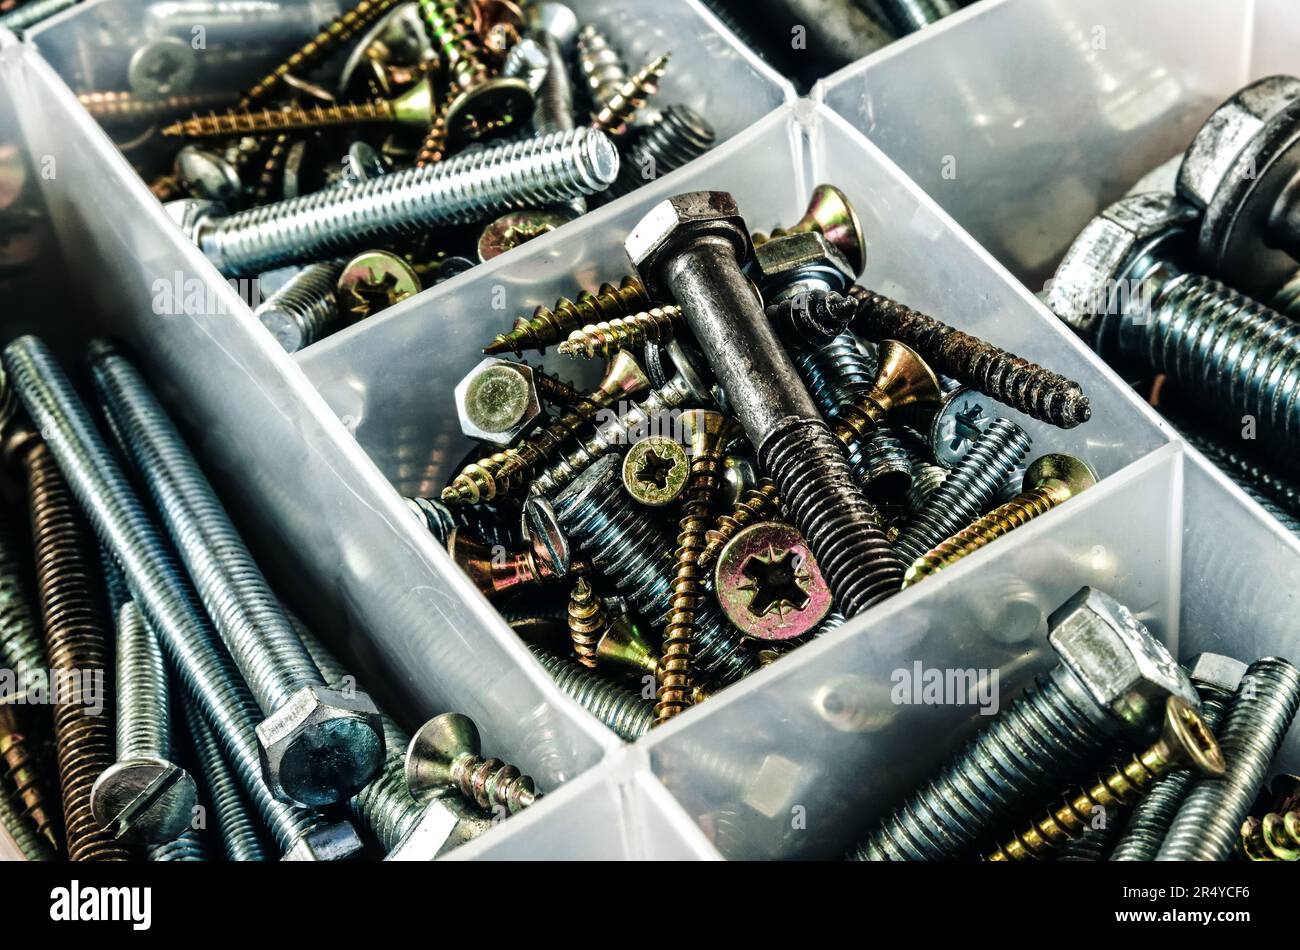 Silver and gold metal screws. Bolts and screws in plastic container. Stock Photo